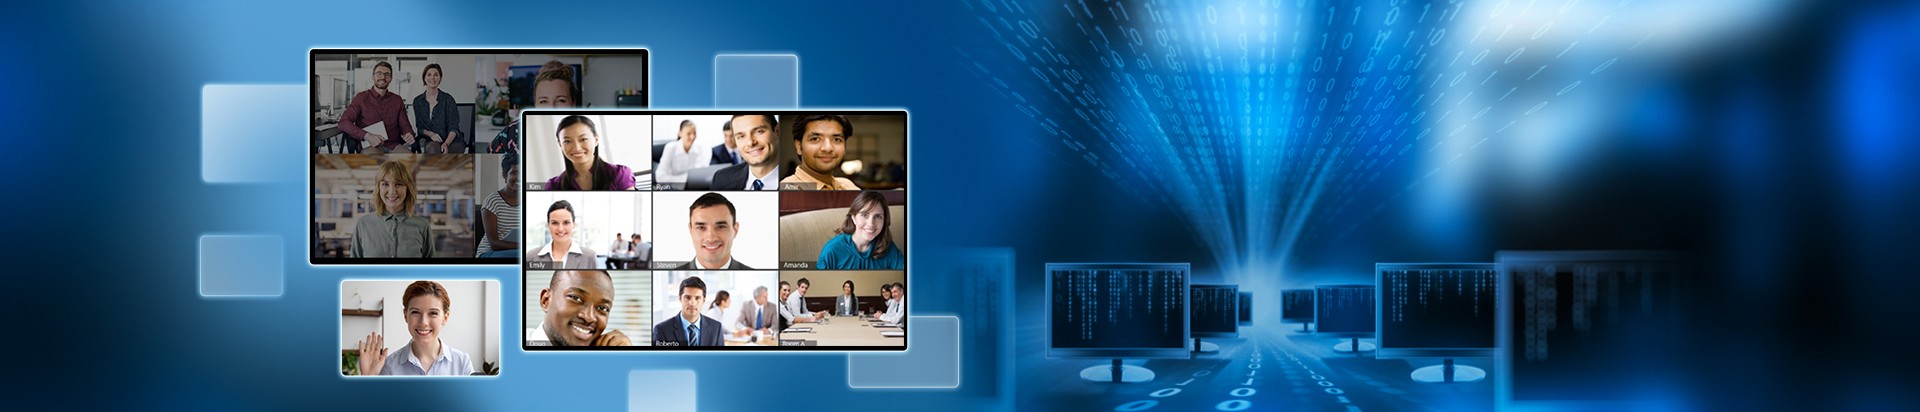 Video conferencing solution